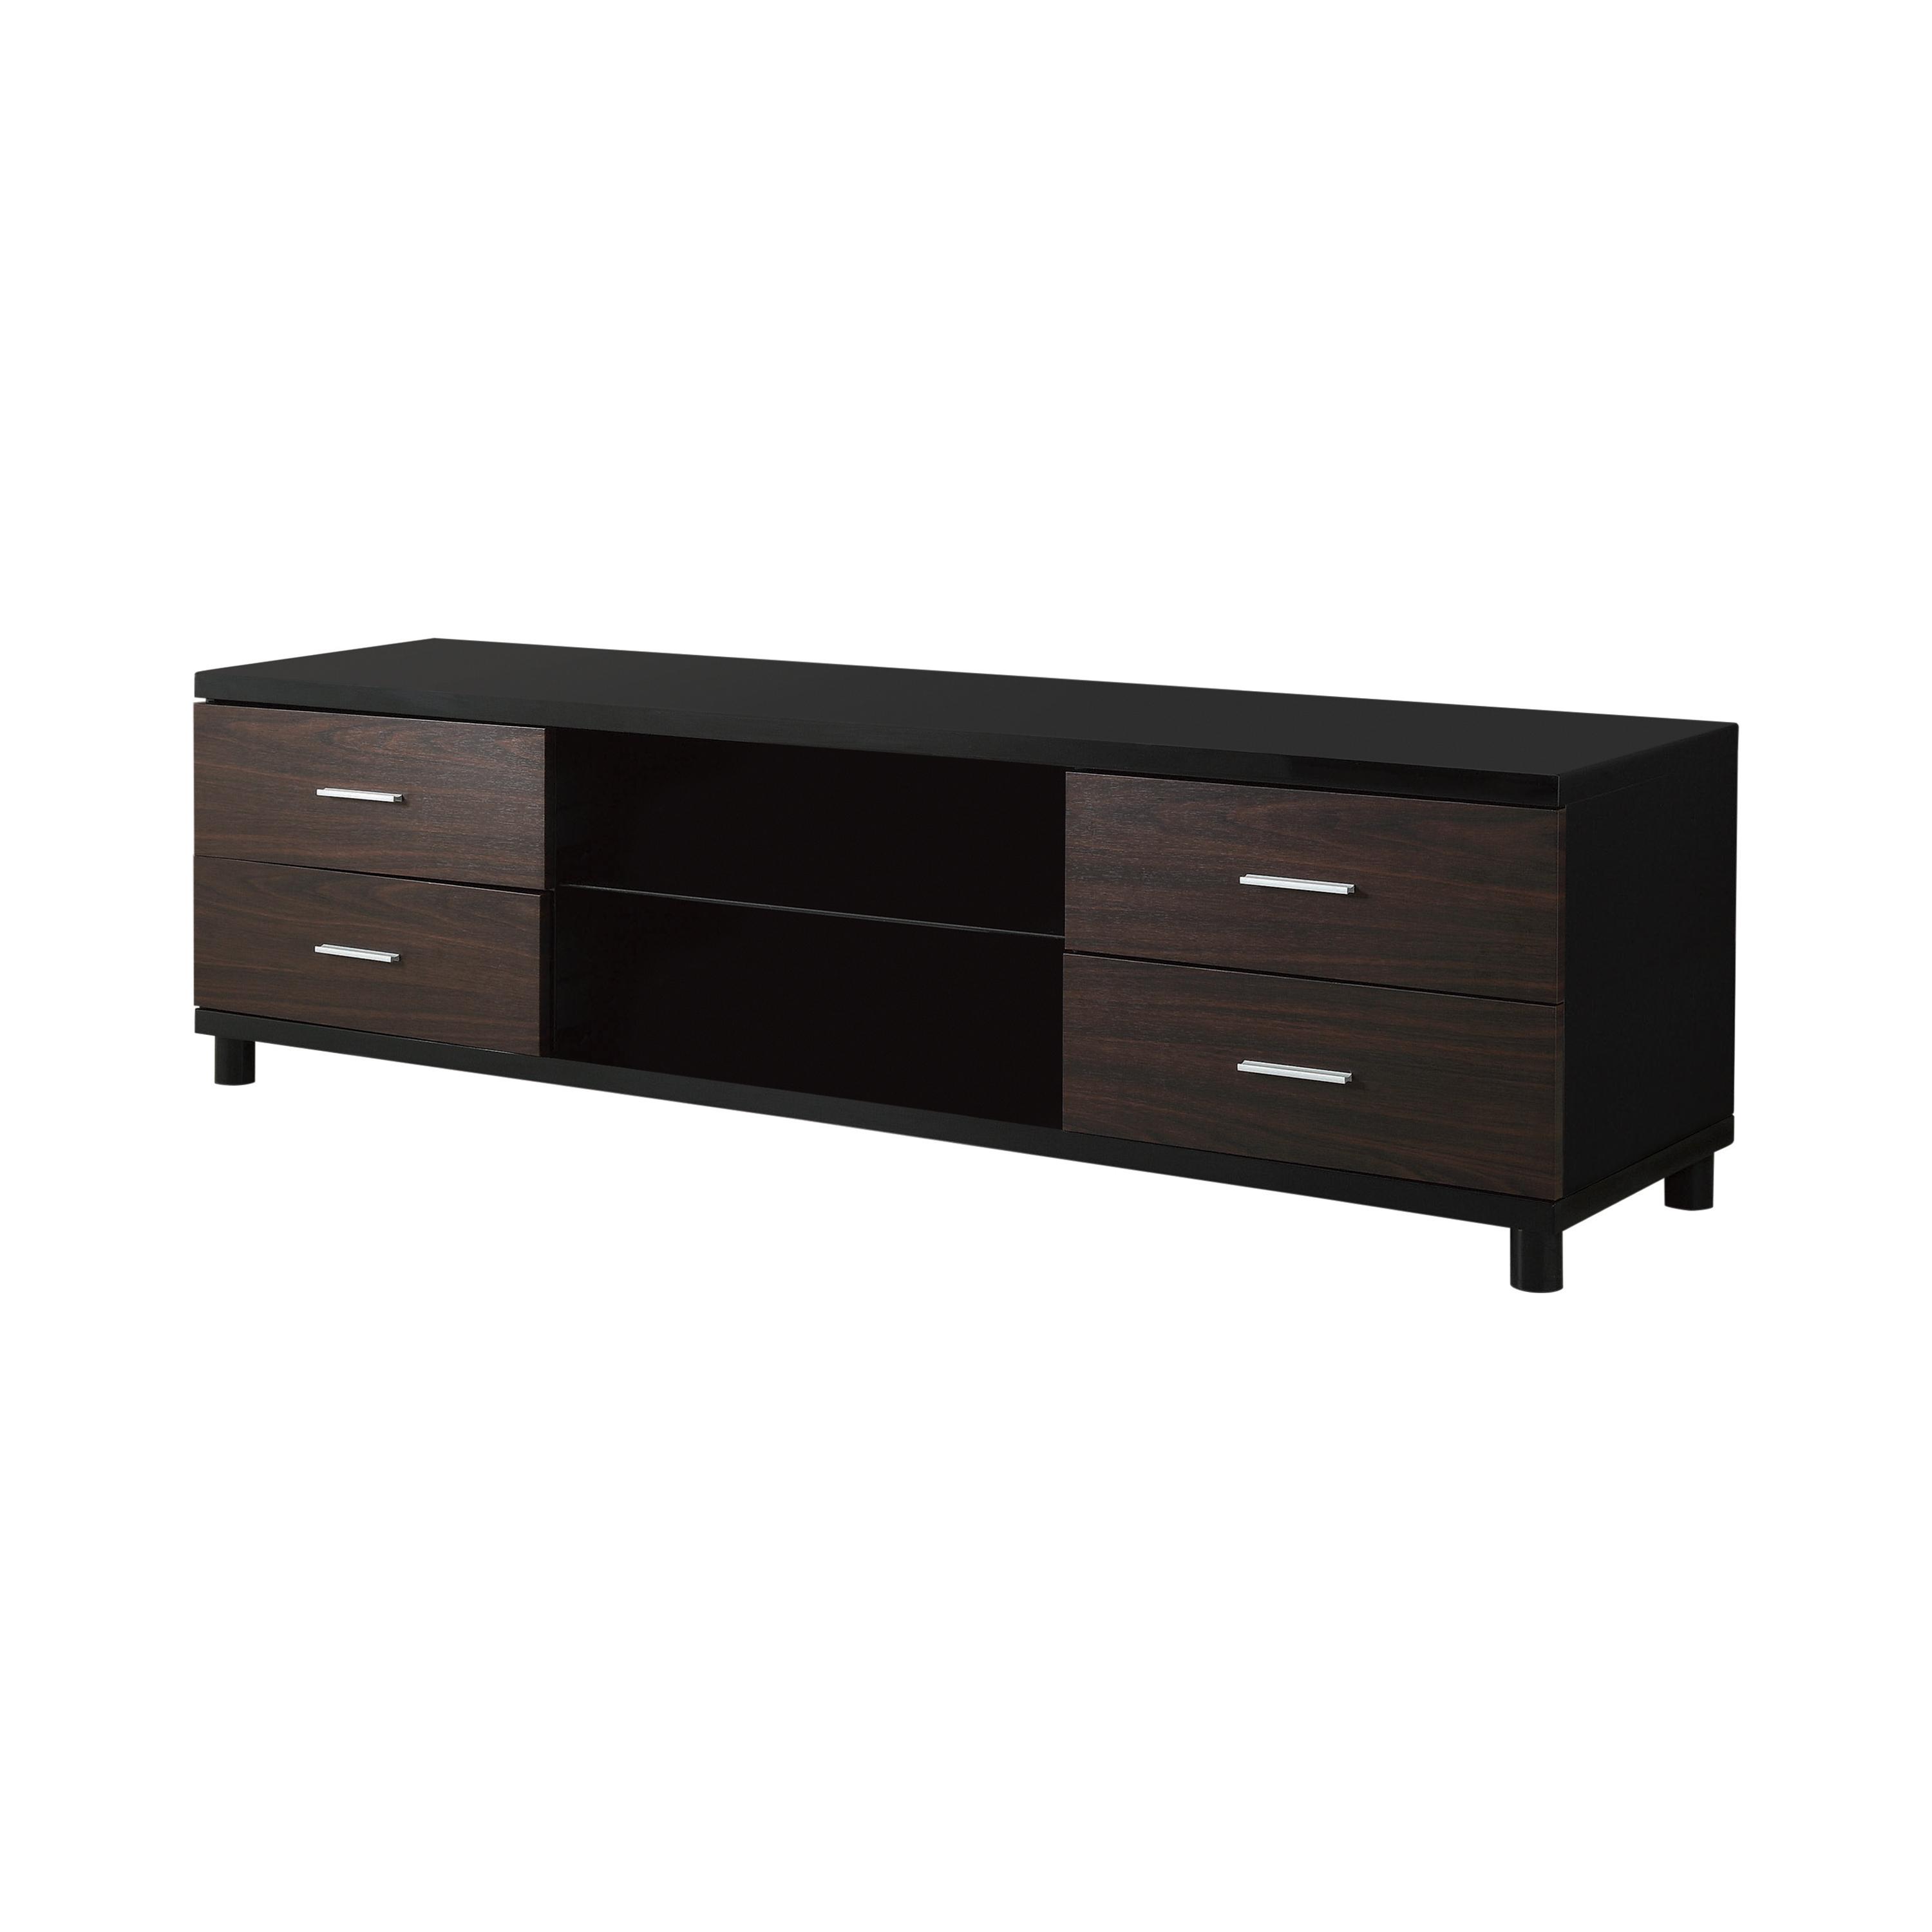 Transitional Tv Console 700826 700826 in Walnut, Black 